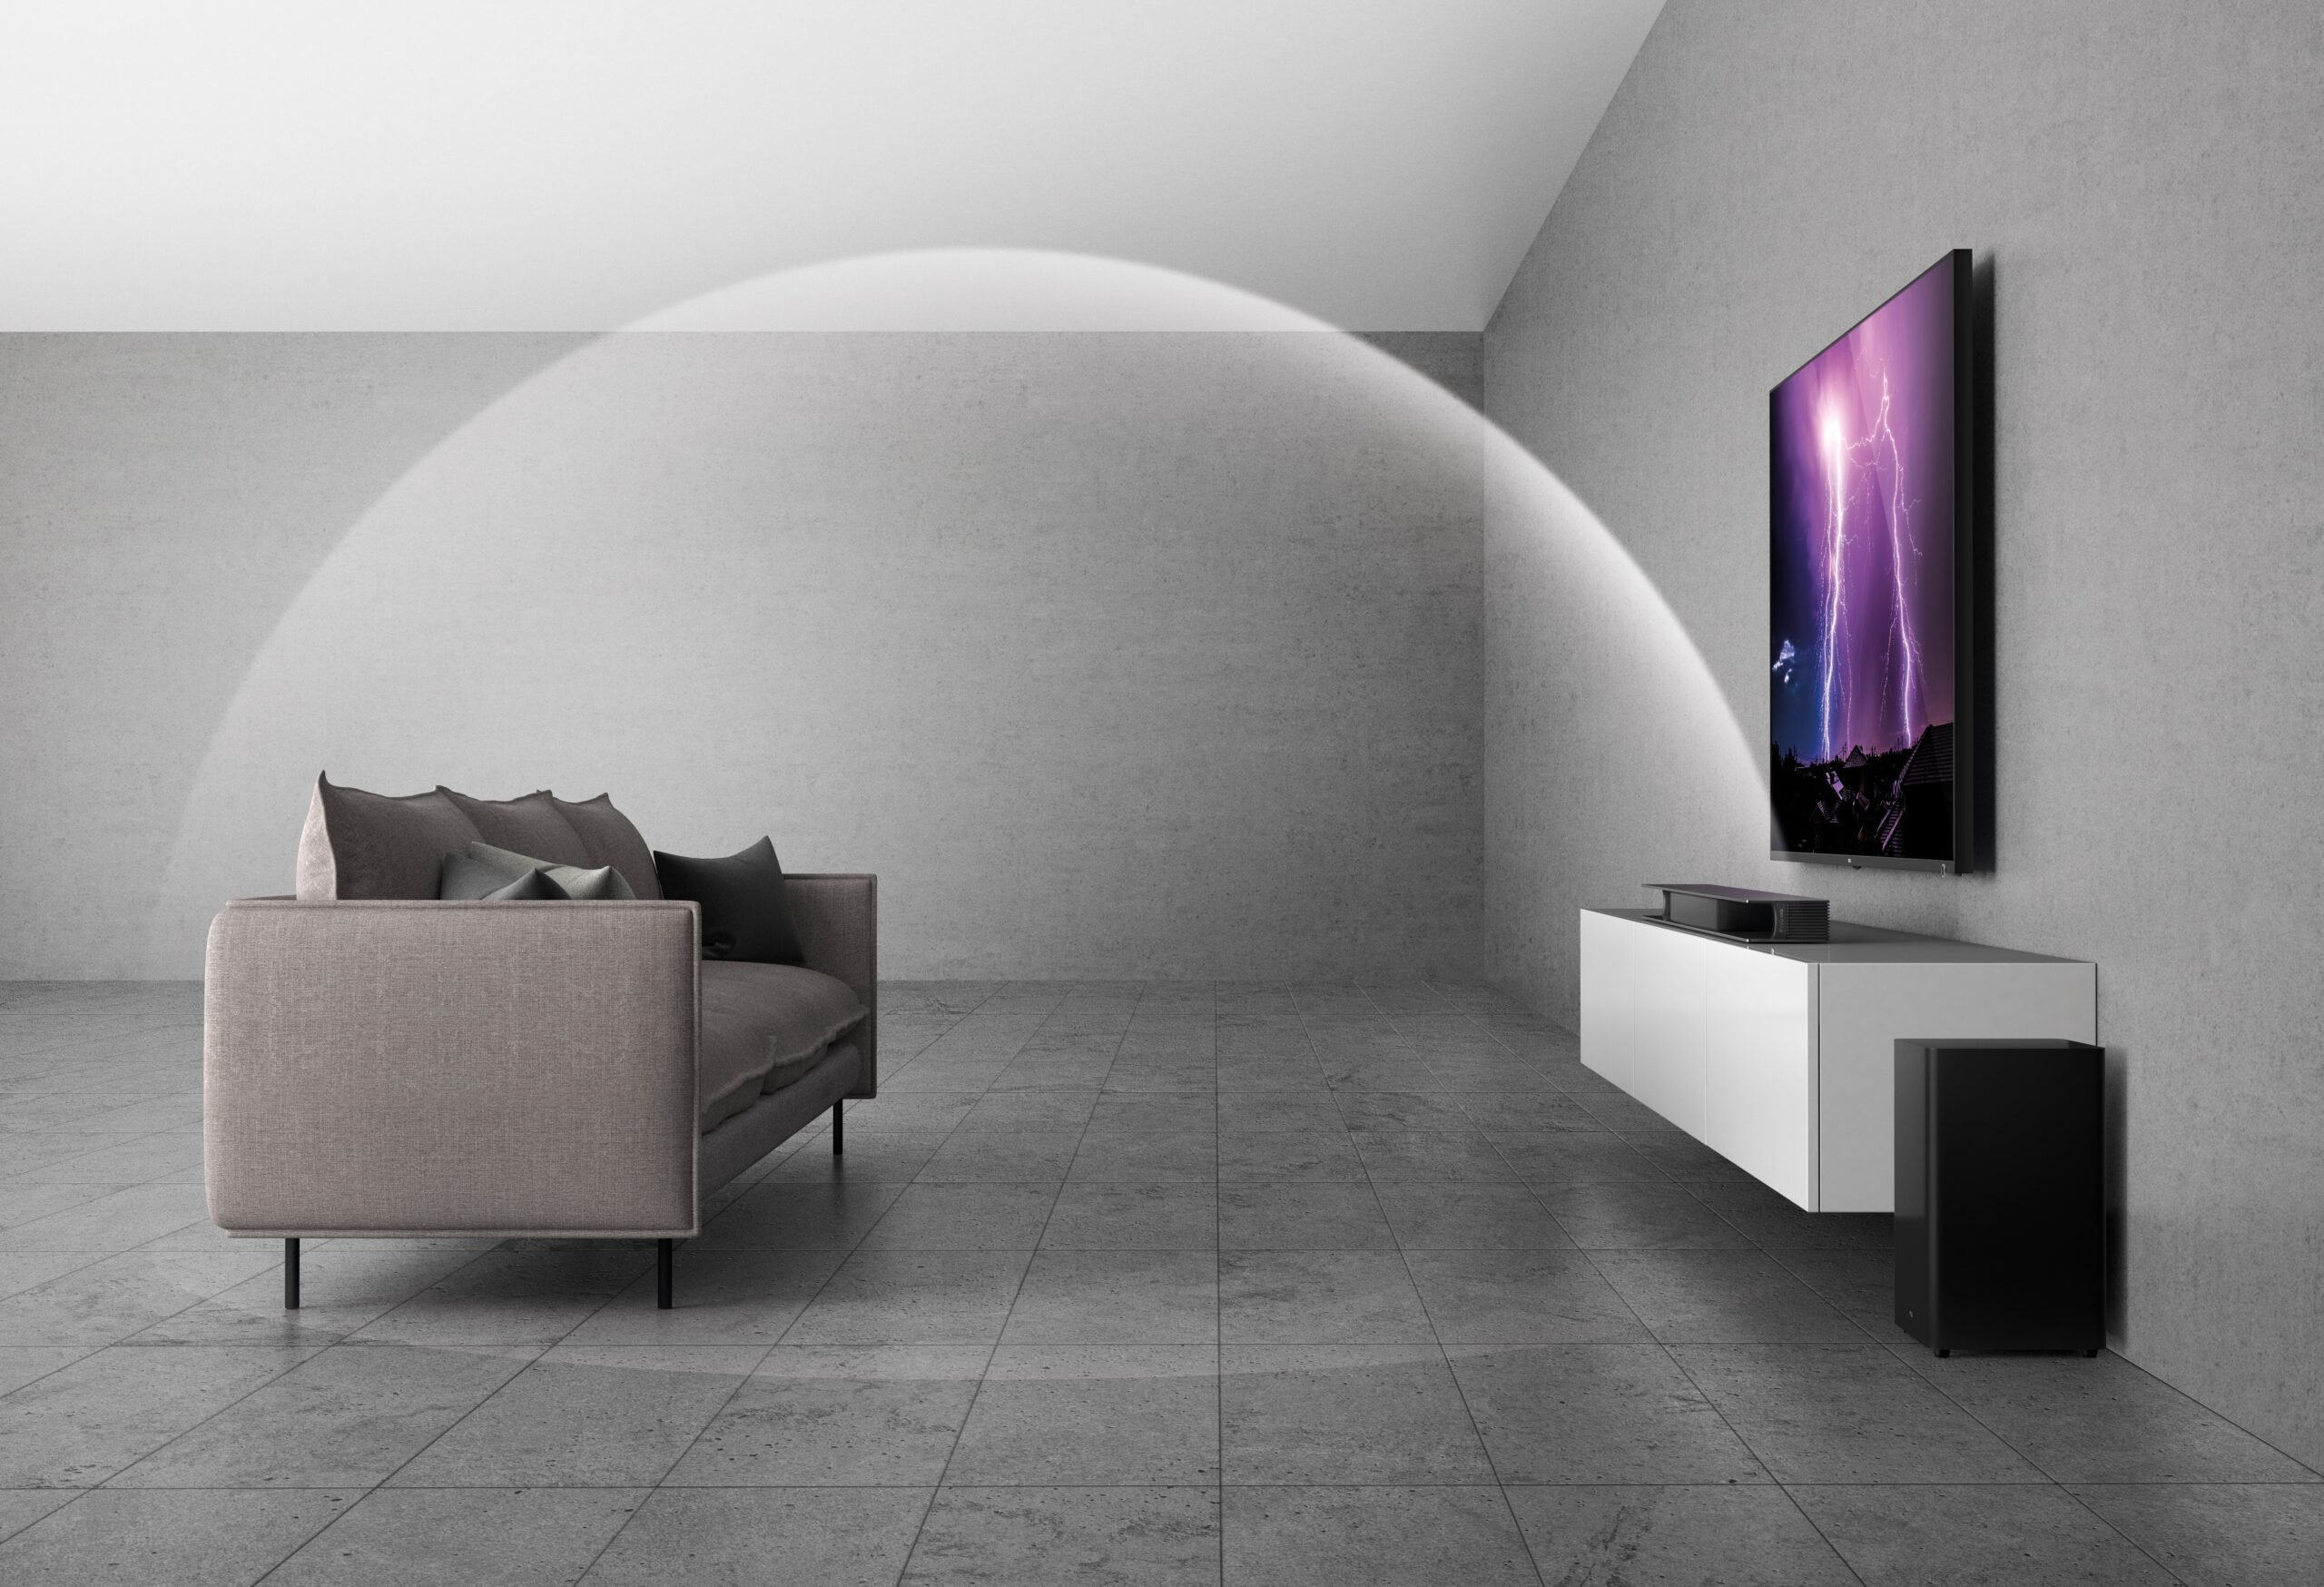 Surround sound explained: from 5.1 to Dolby Atmos, DTS:X and room EQ